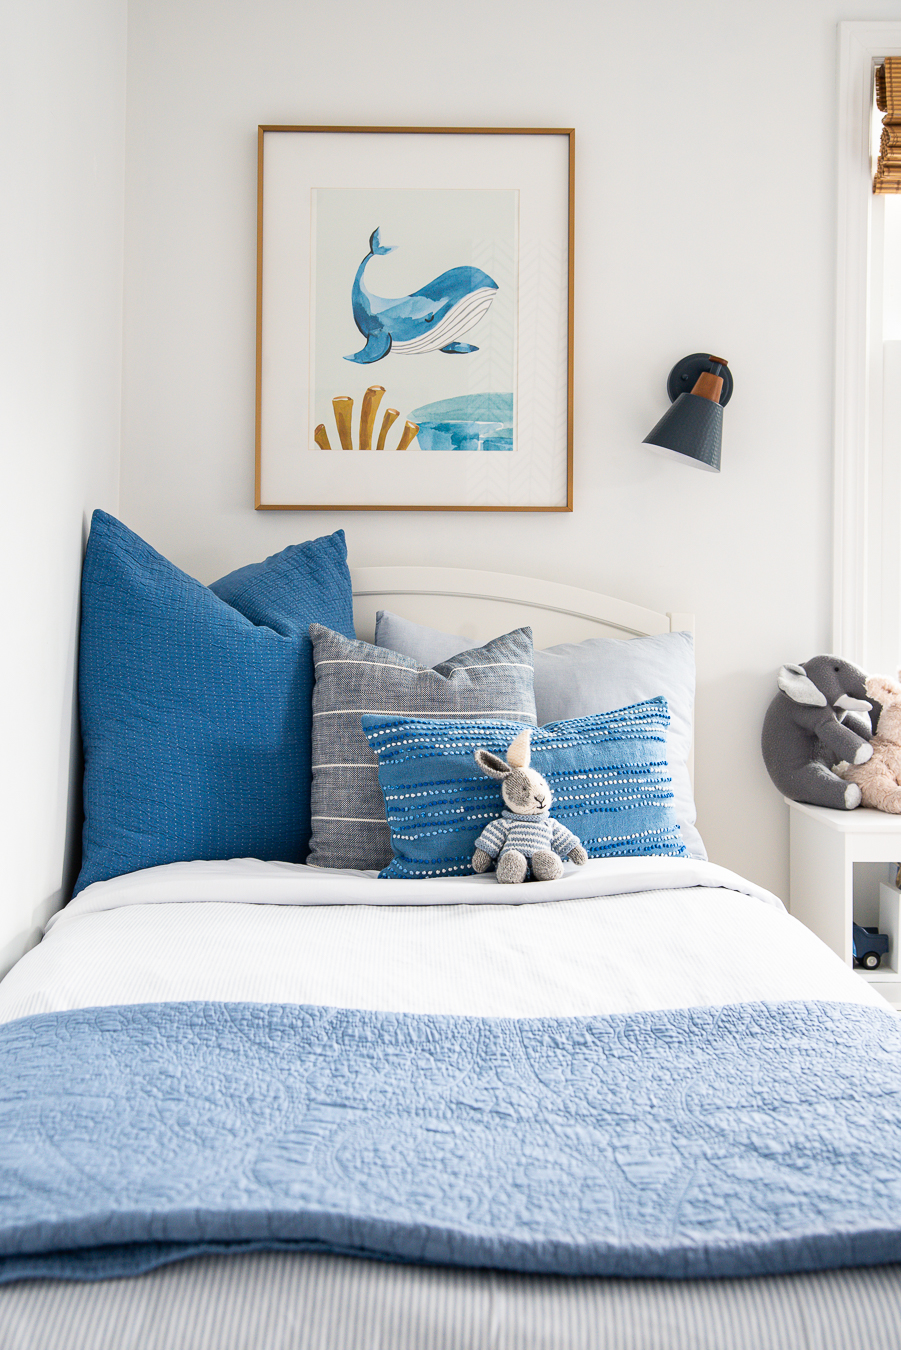 twin bed with blue bedding and whale artwork on the wall